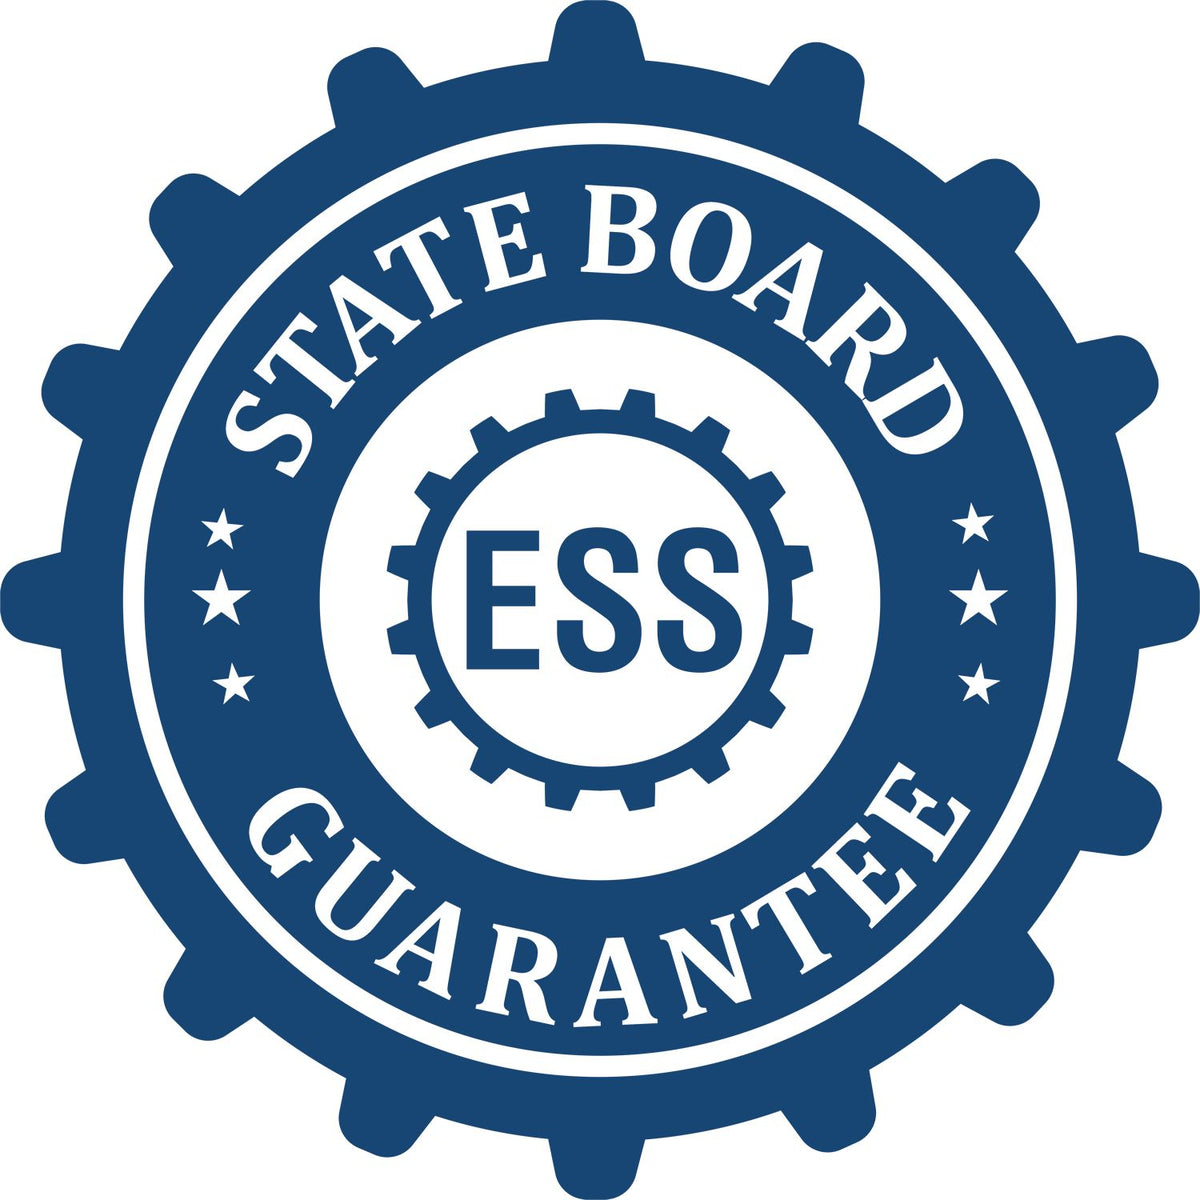 An emblem in a gear shape illustrating a state board guarantee for the Heavy-Duty New York Rectangular Notary Stamp product.